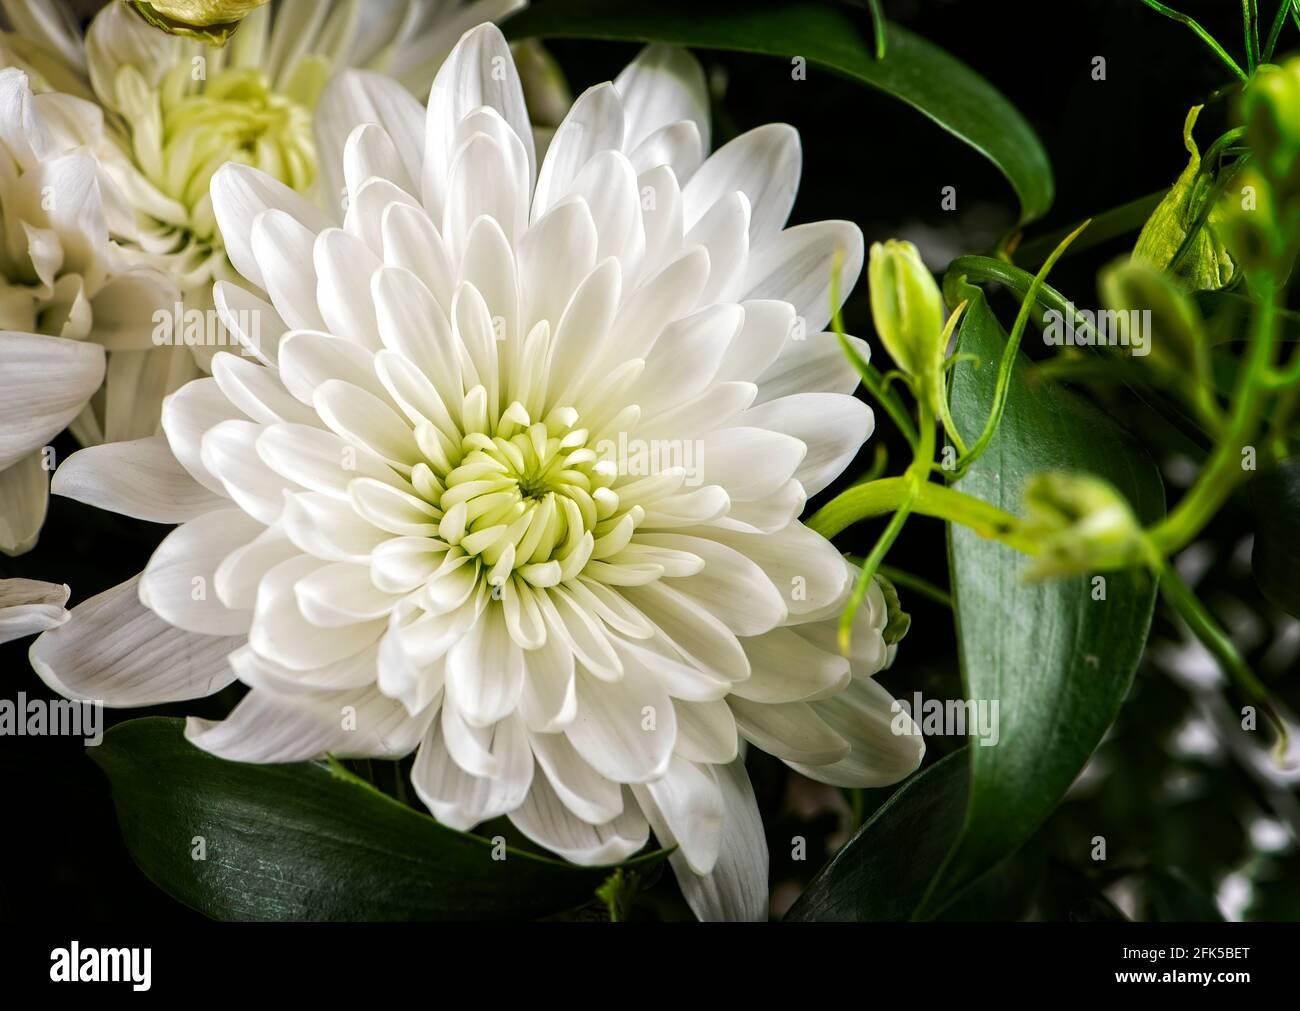 Blooming Chrysanthemum flowers mixed with variety of greens Stock Photo